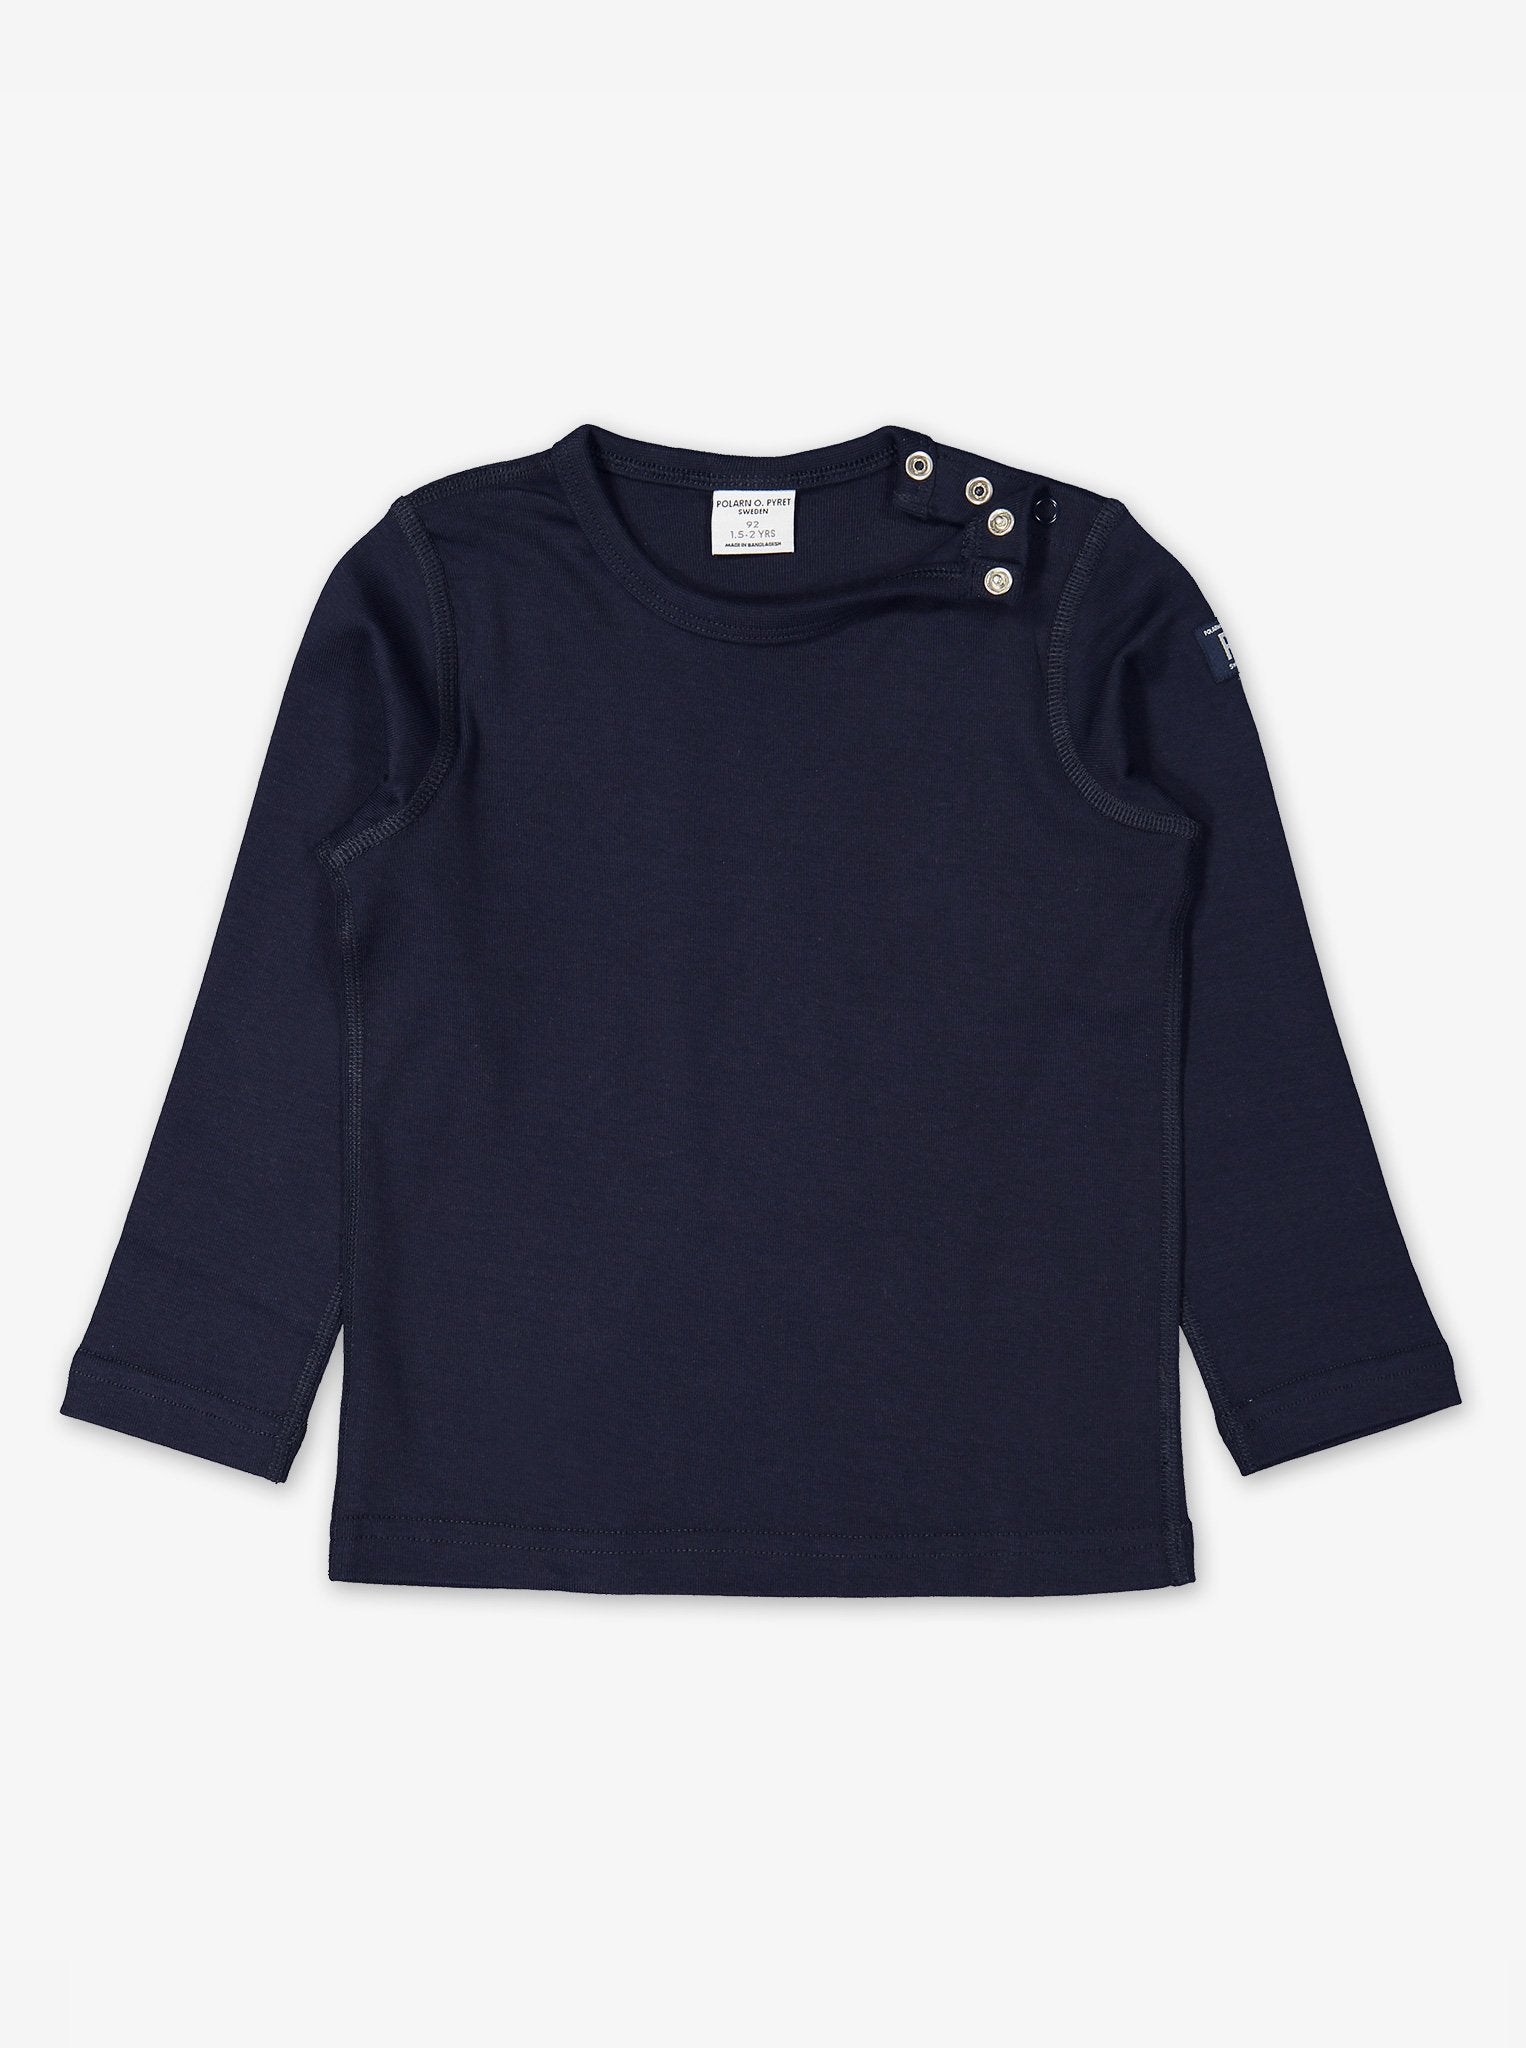 navy blue classic kids top, ethical organic cotton, polarn o. pyret quality 